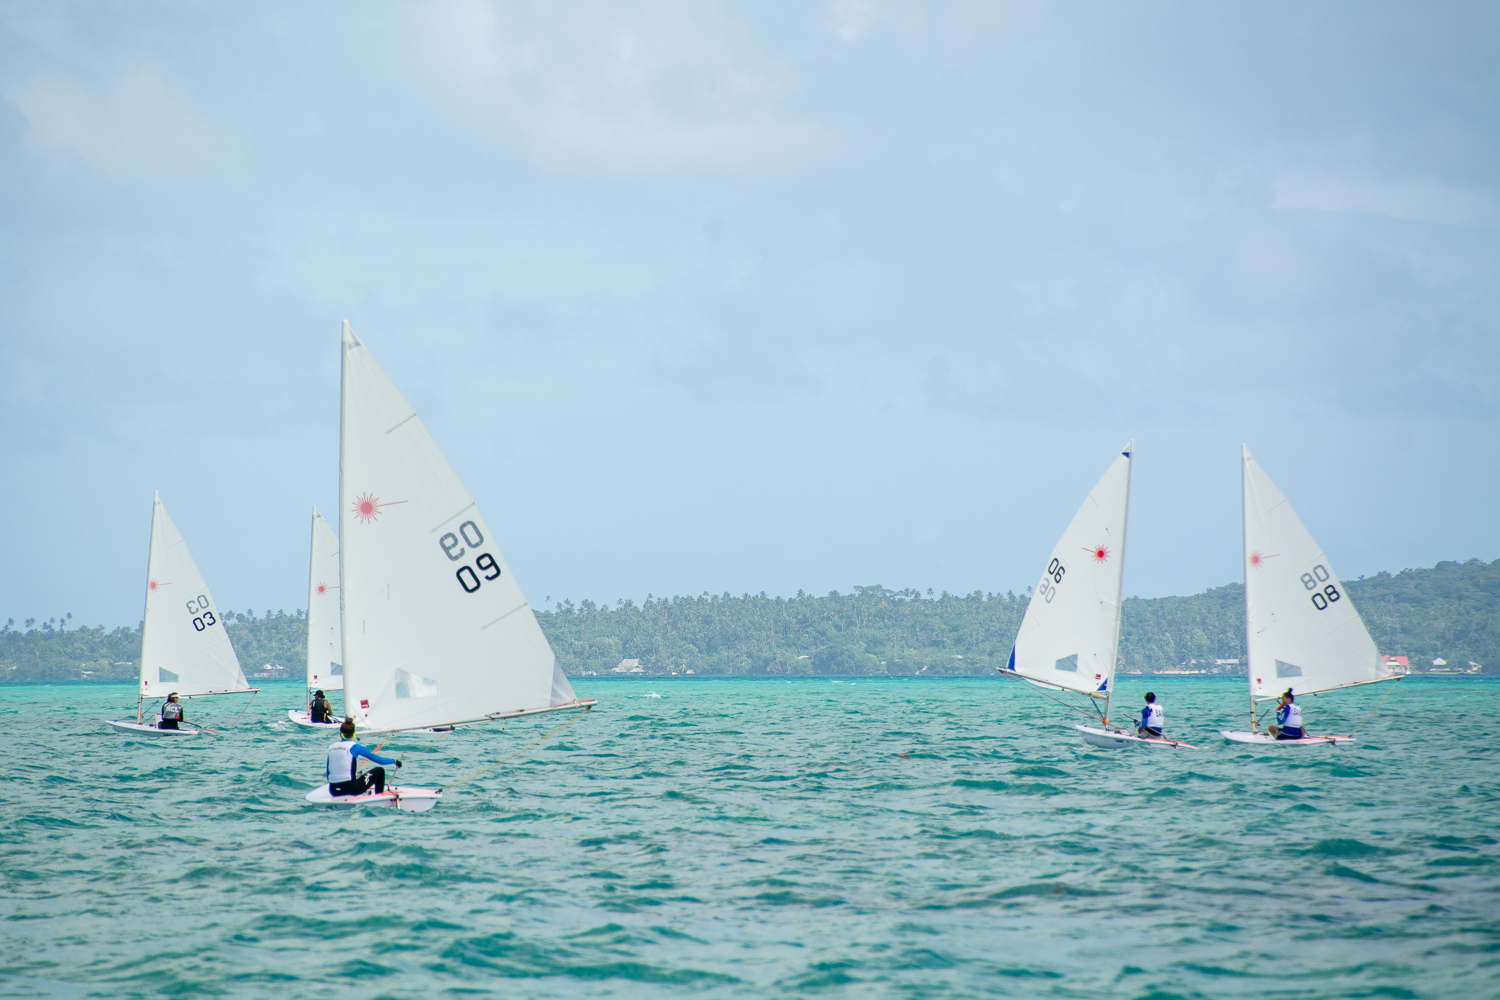 Sailing boats competing in a race